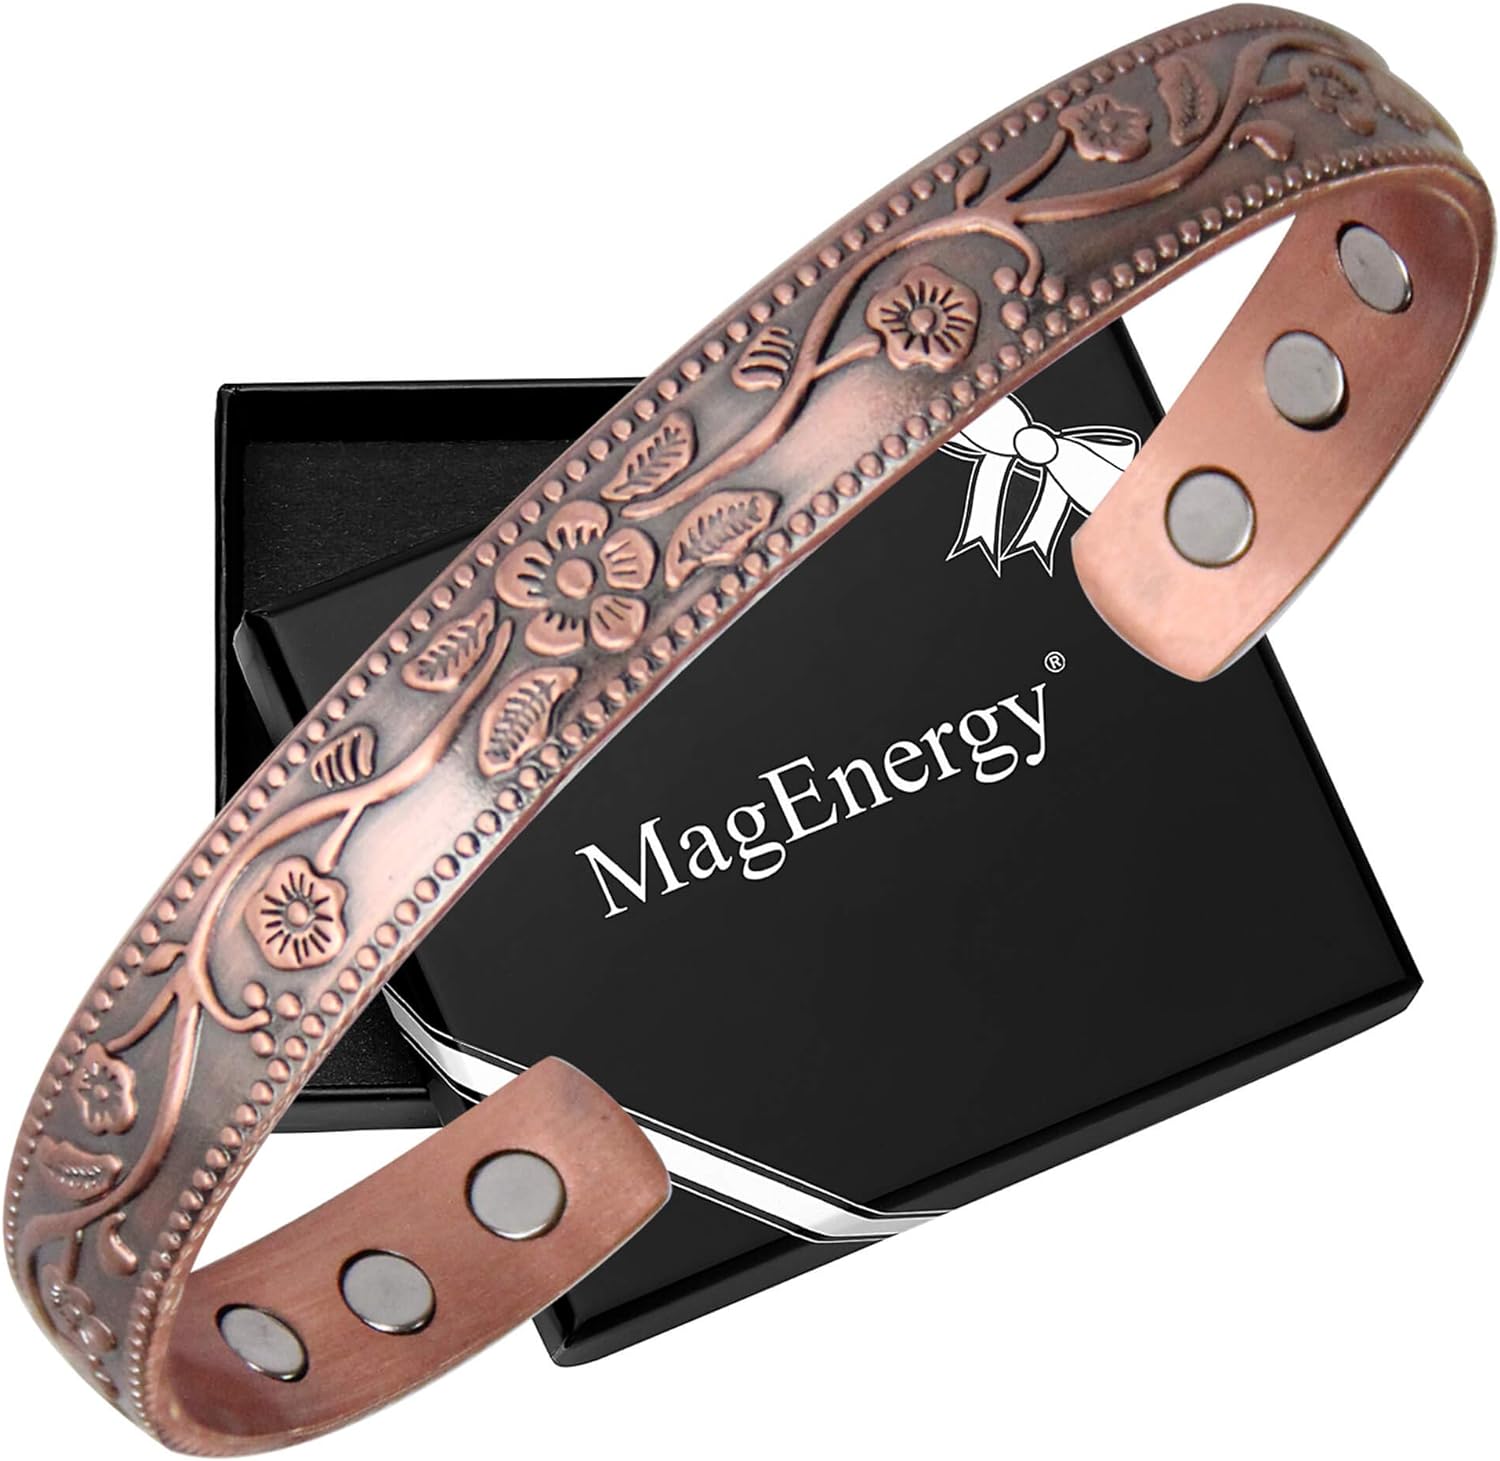 Magnetic Copper Bracelet for Women Arthritis 6.8 inches Adjustable to Fit Most Wrist